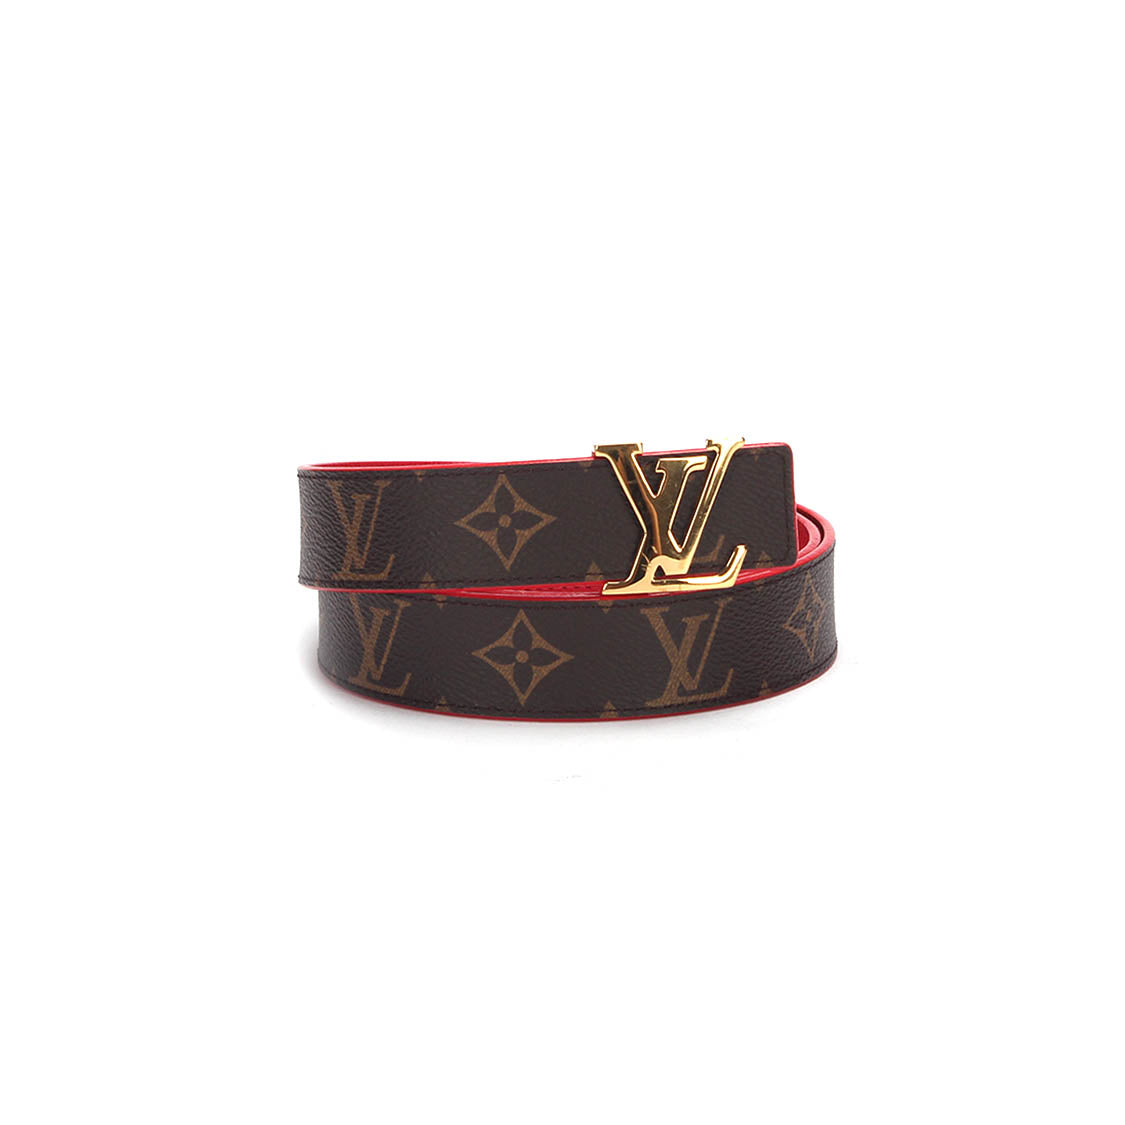 LOUIS VUITTON 25 MM BELT  TRY-ON, SIZING & COMPARISON TO MY GUCCI